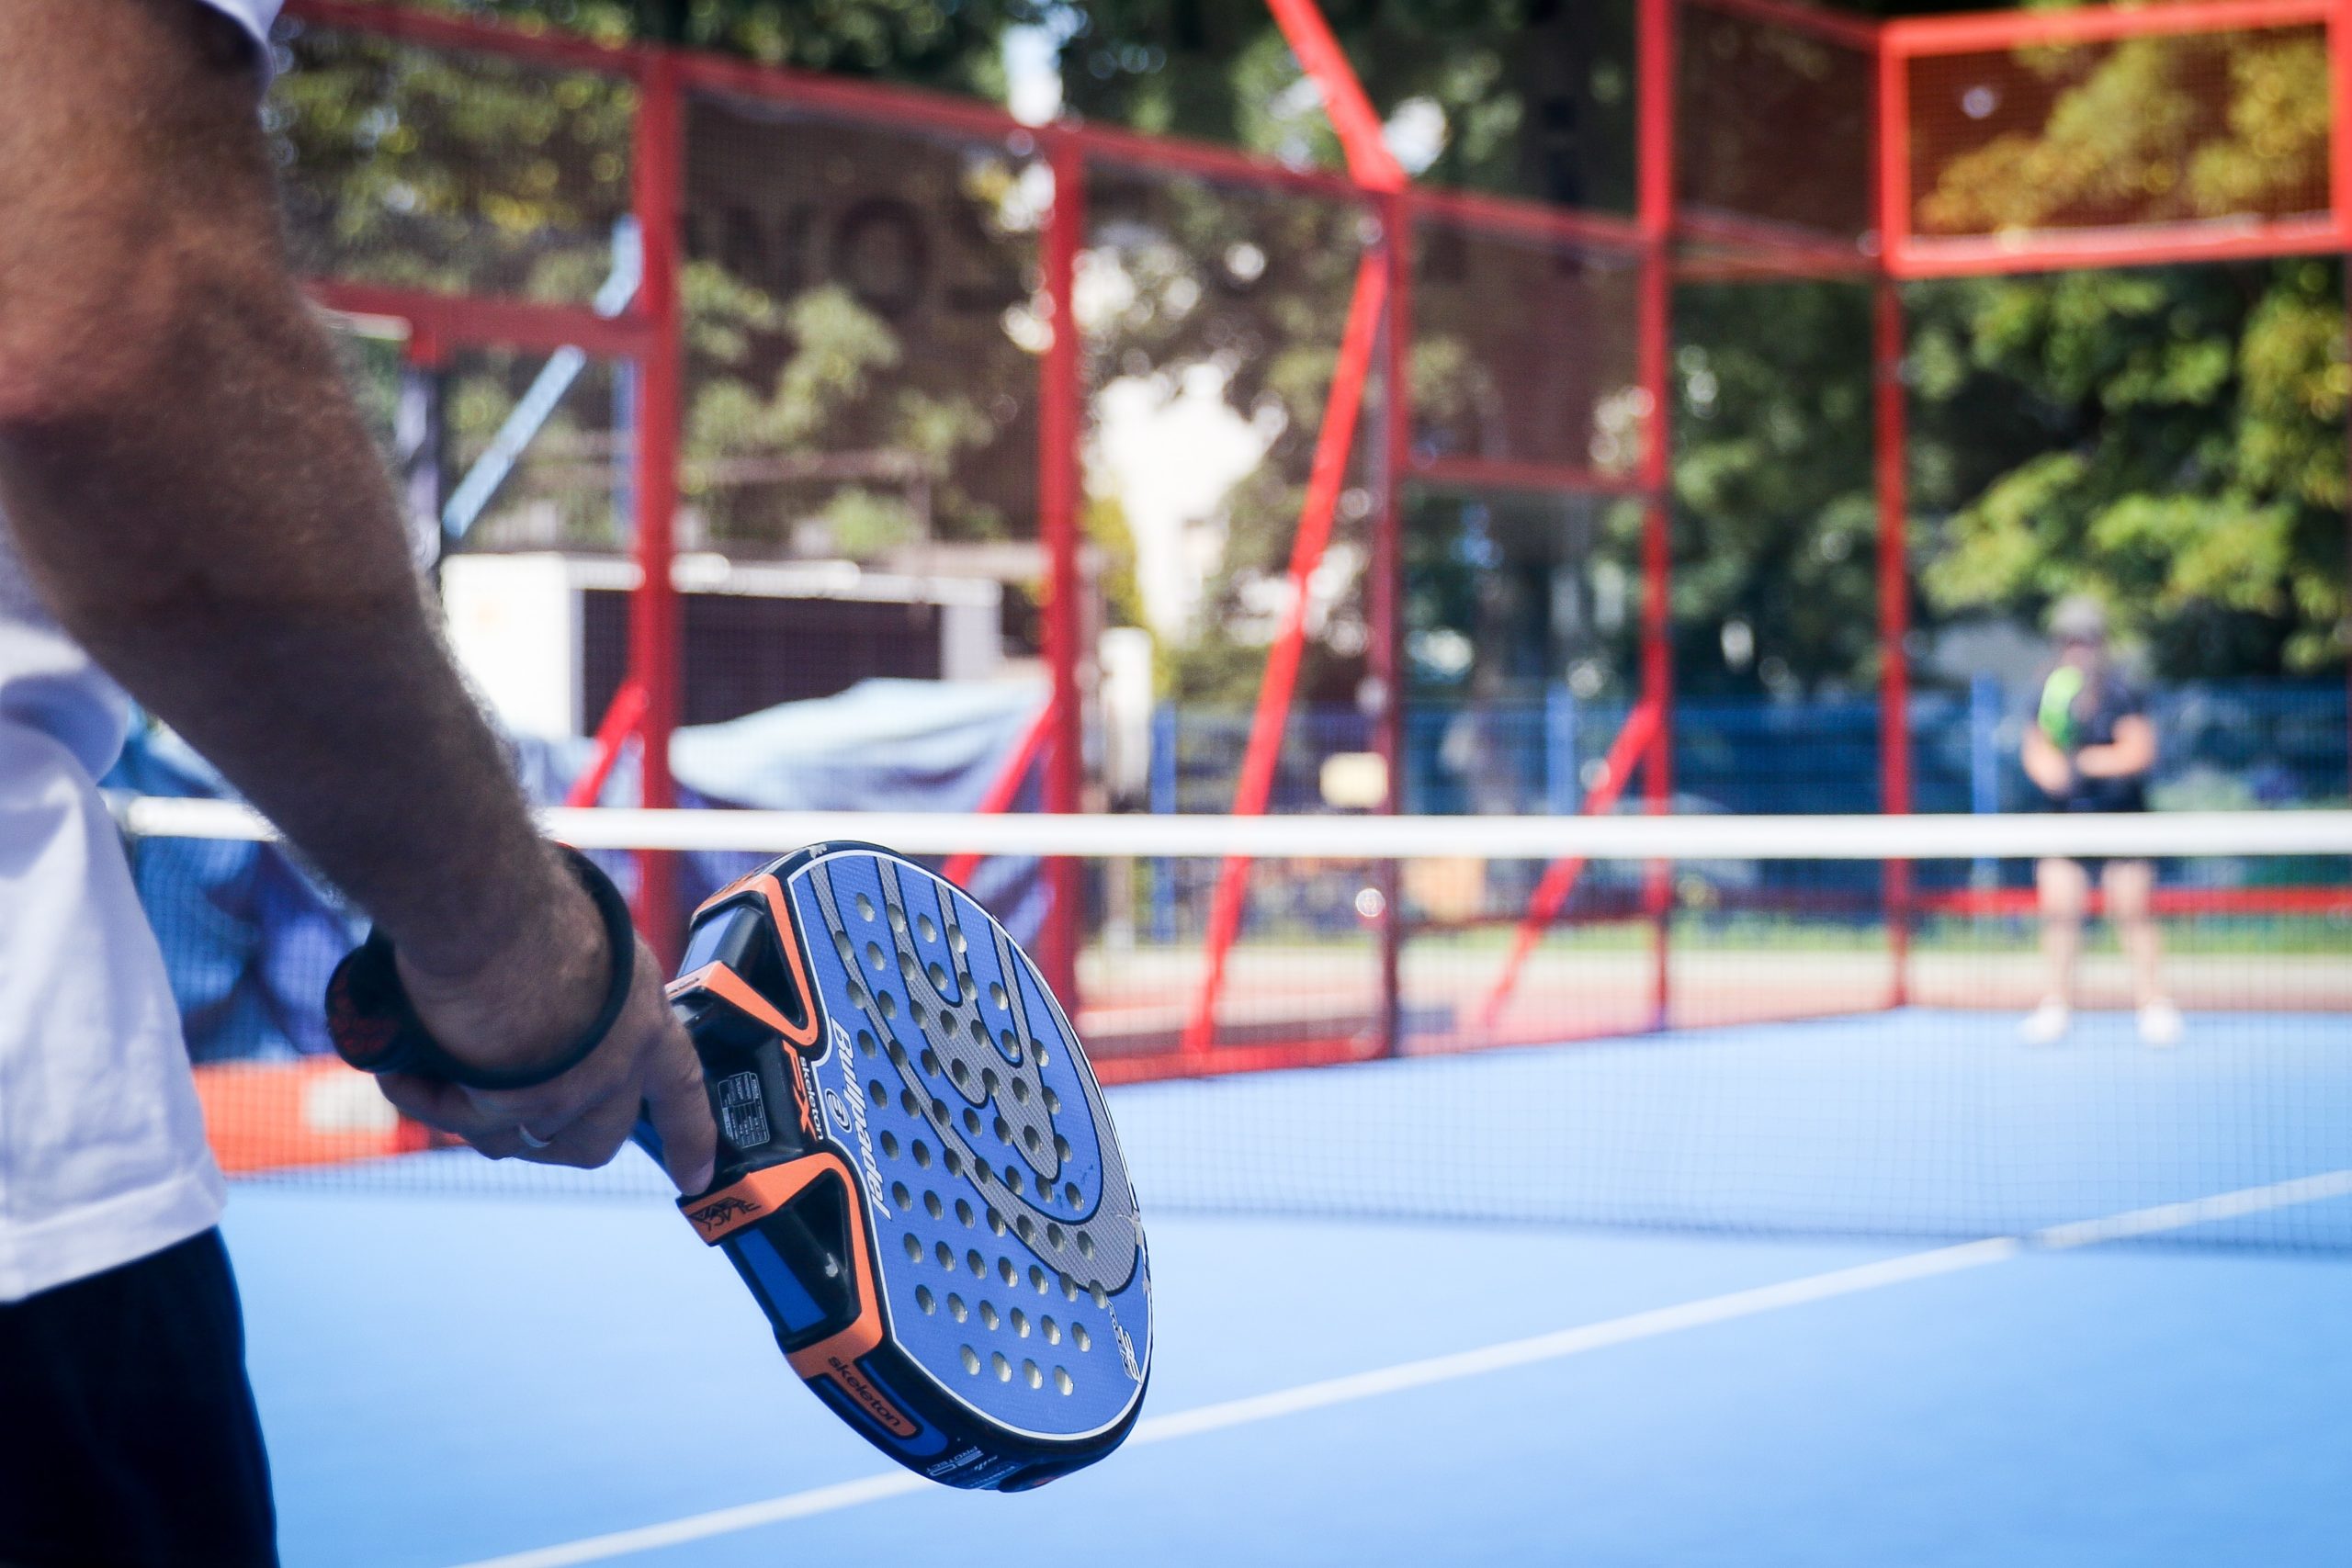 What is Padel & How To Play